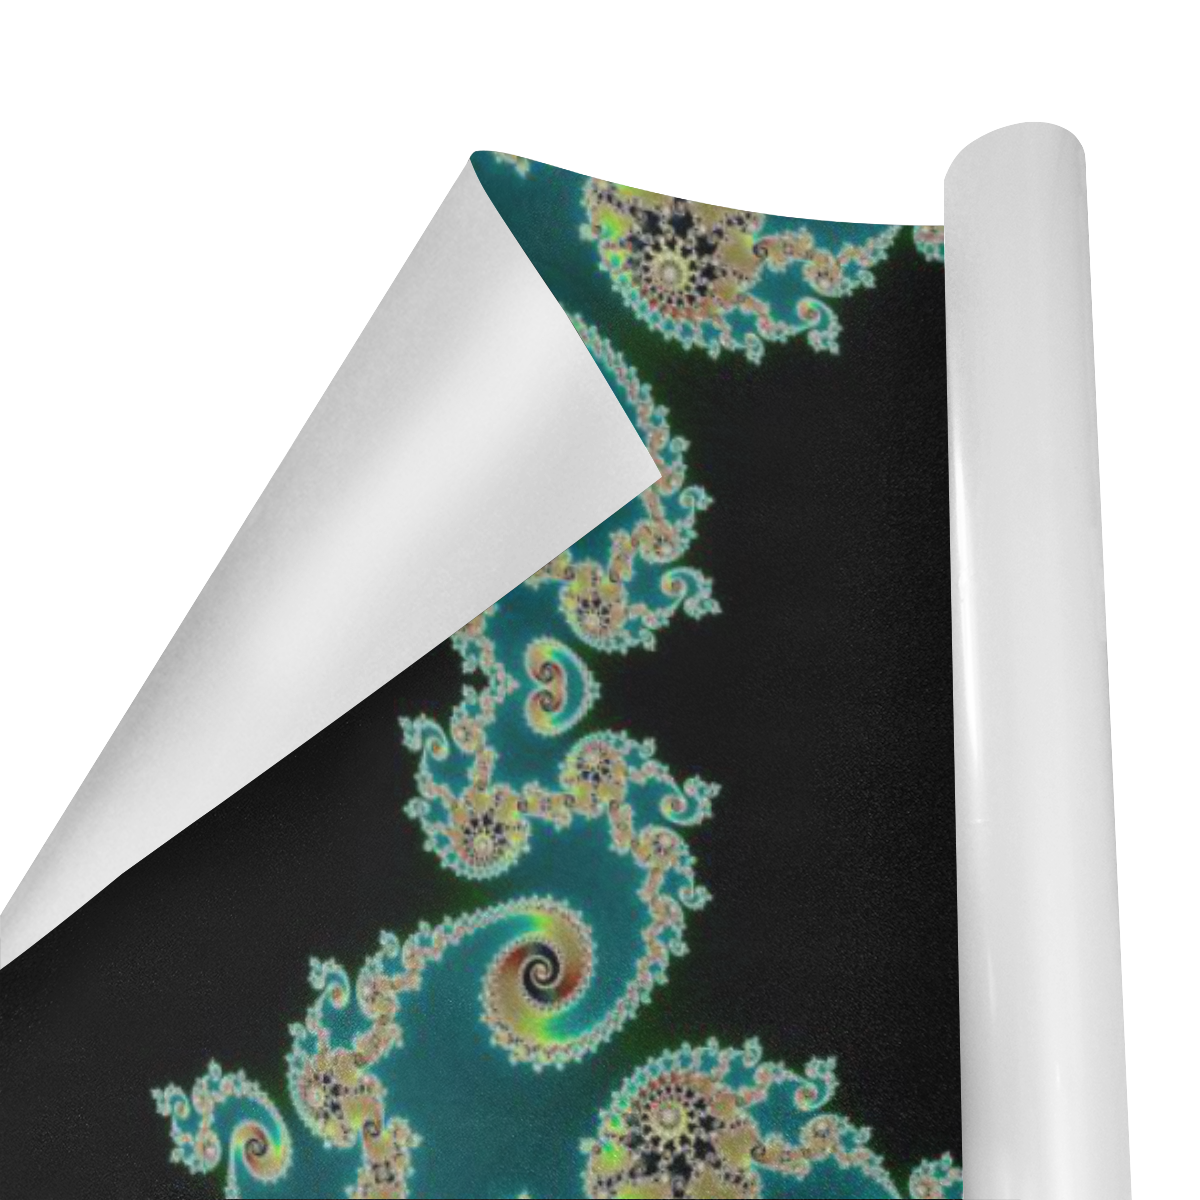 Aqua and Black  Hearts Lace Fractal Abstract Gift Wrapping Paper 58"x 23" (1 Roll)